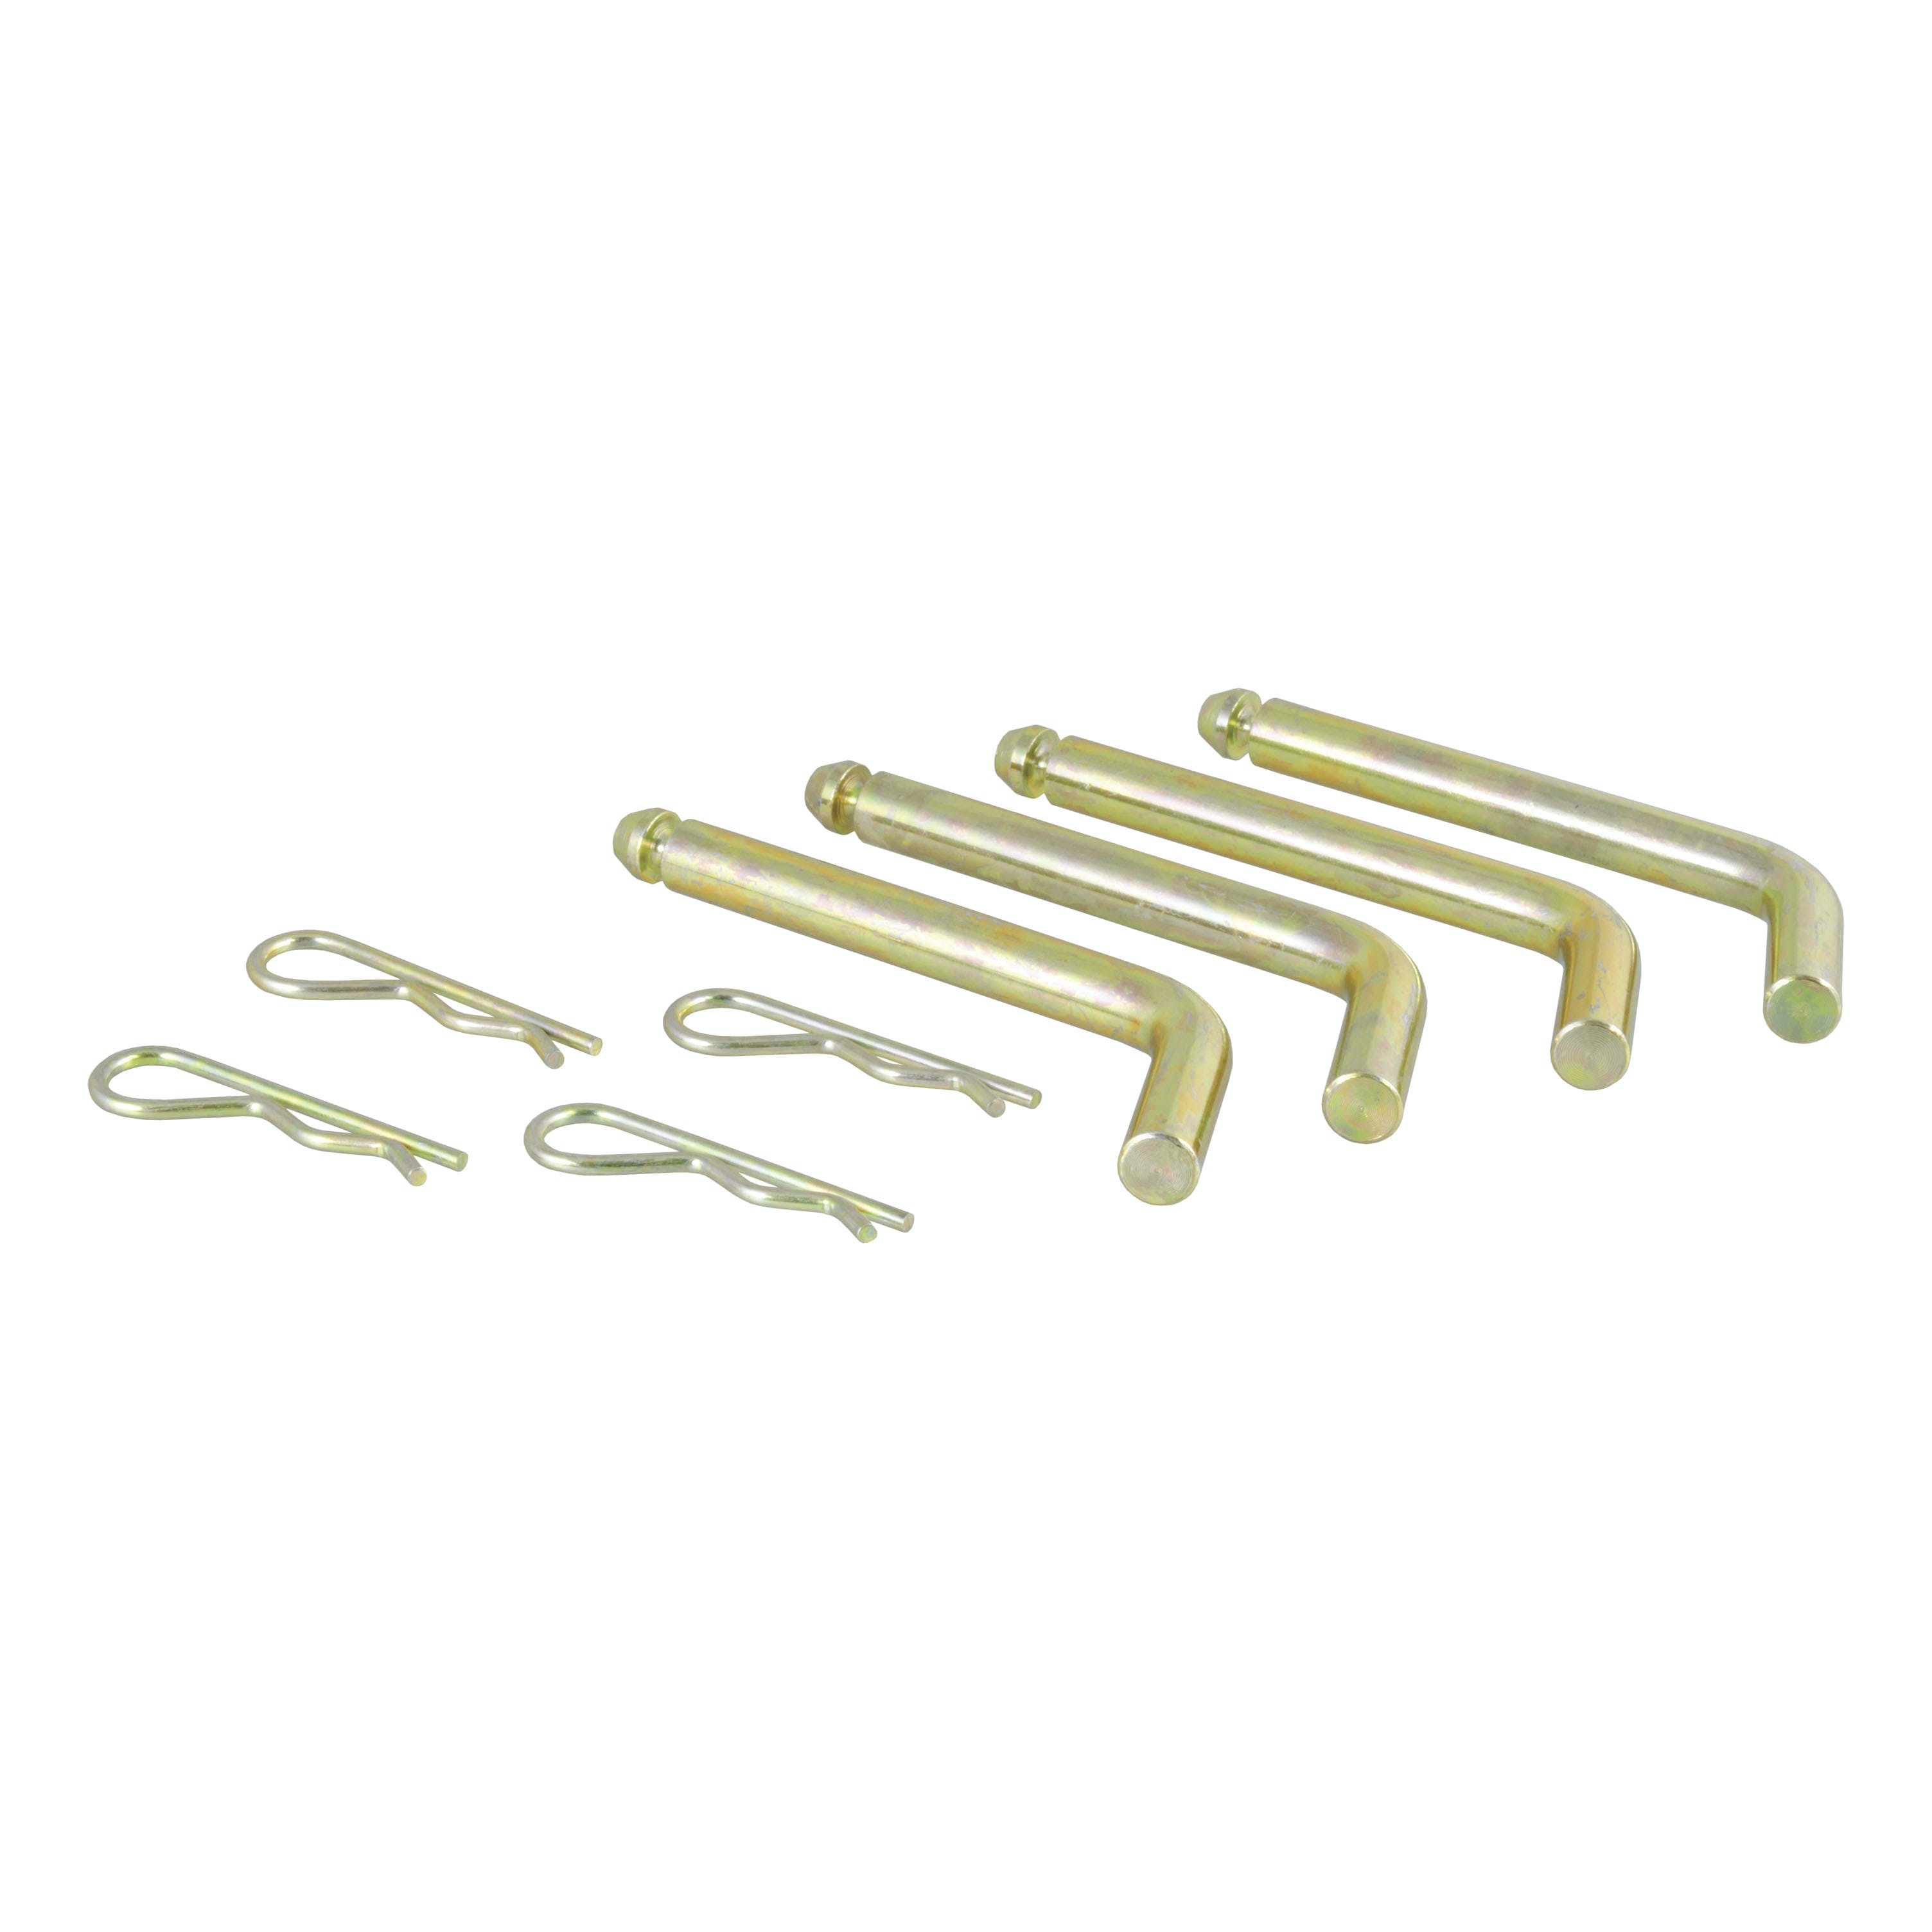 CURT 16902 Replacement 5th Wheel Pins and Clips (1/2 Diameter)